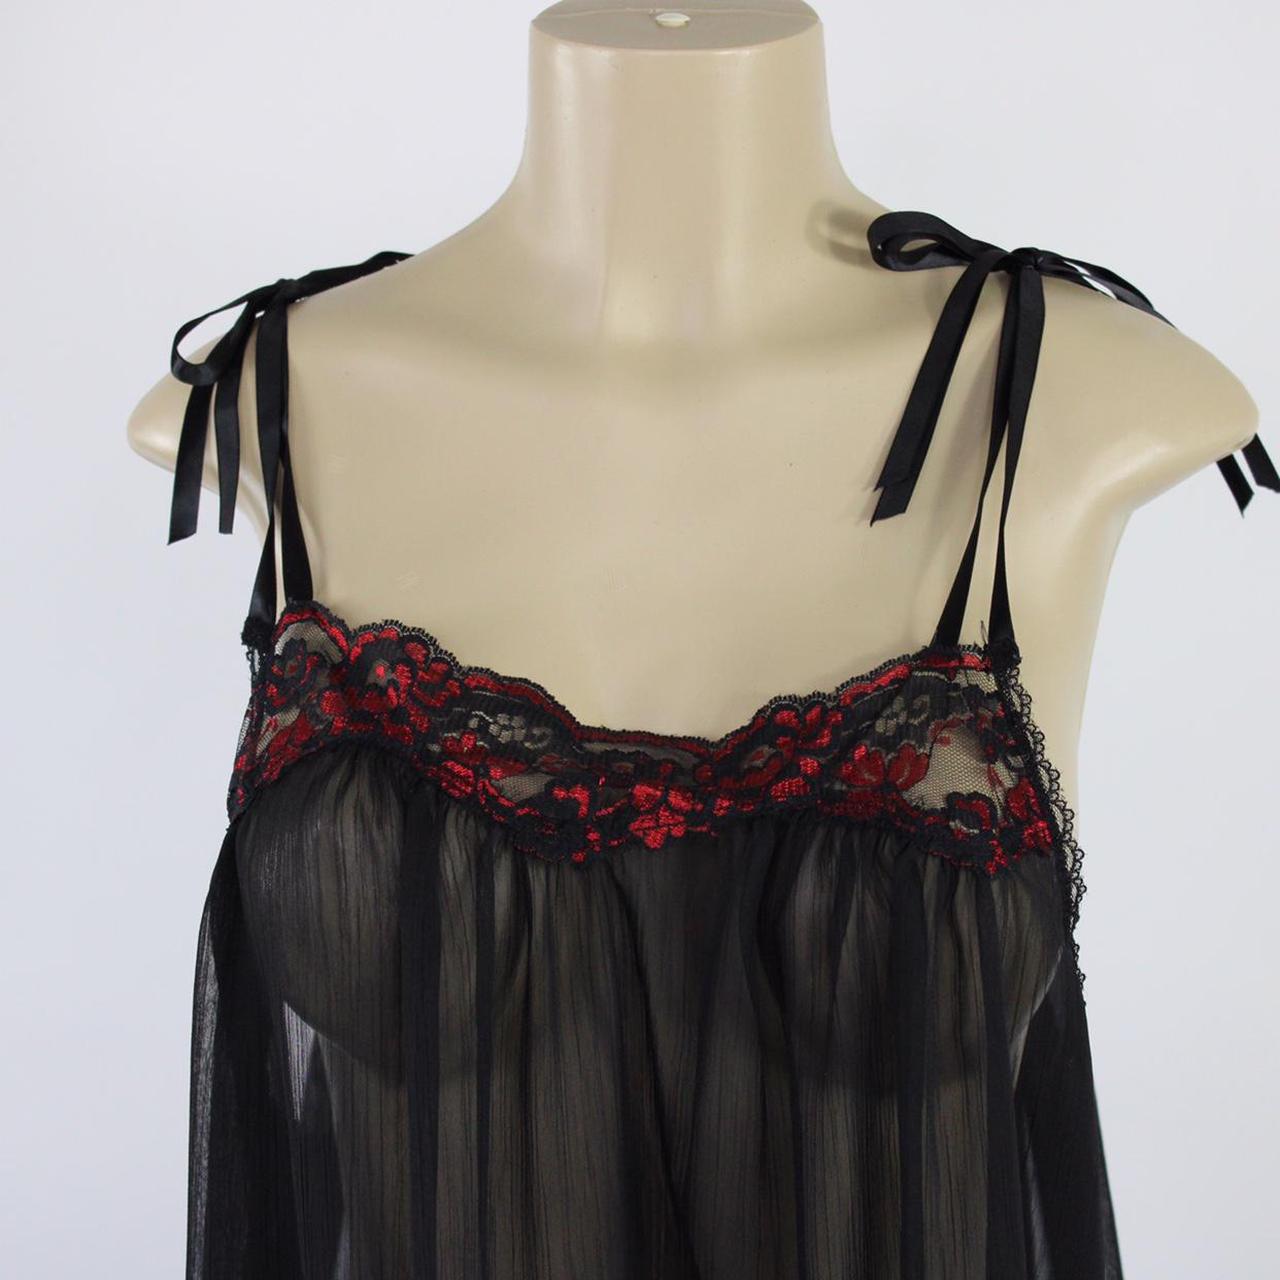 Product Image 3 - Vintage red and black sheer